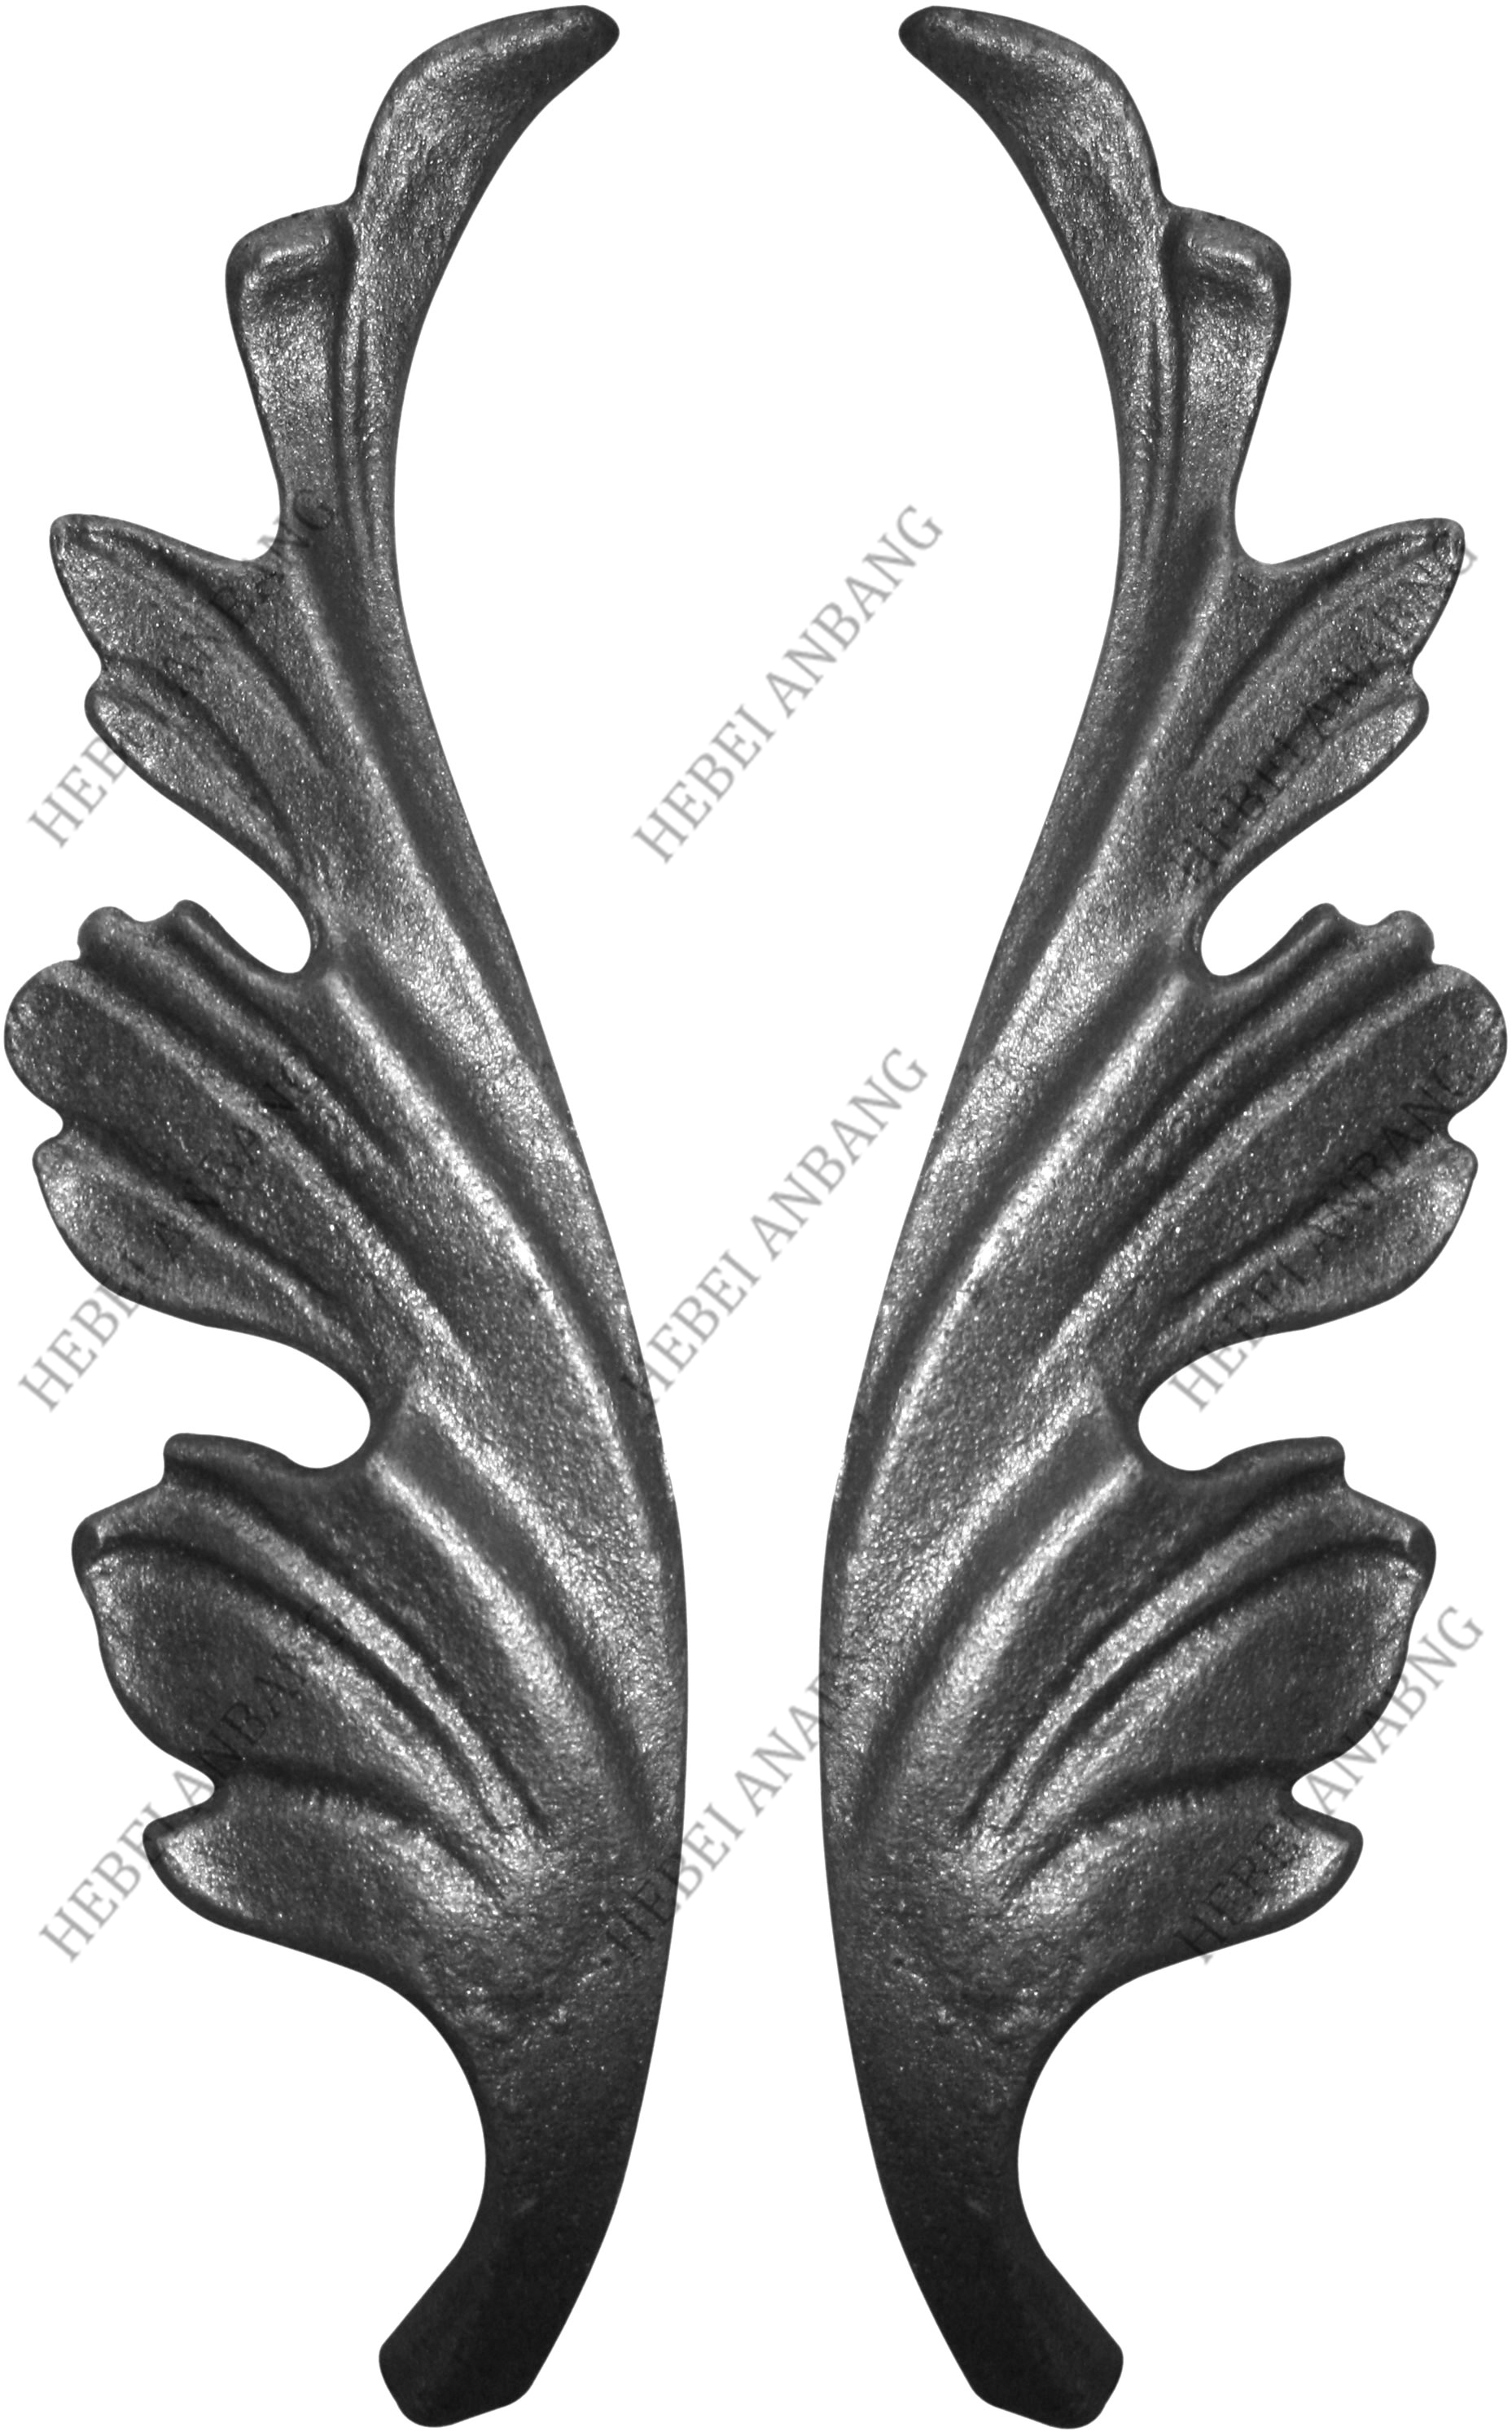 WHOLESALE WROUGHT IRON LEAVES/DECORATIVE CAST STEEL LEAVES AND FLOWER /CODE：4515